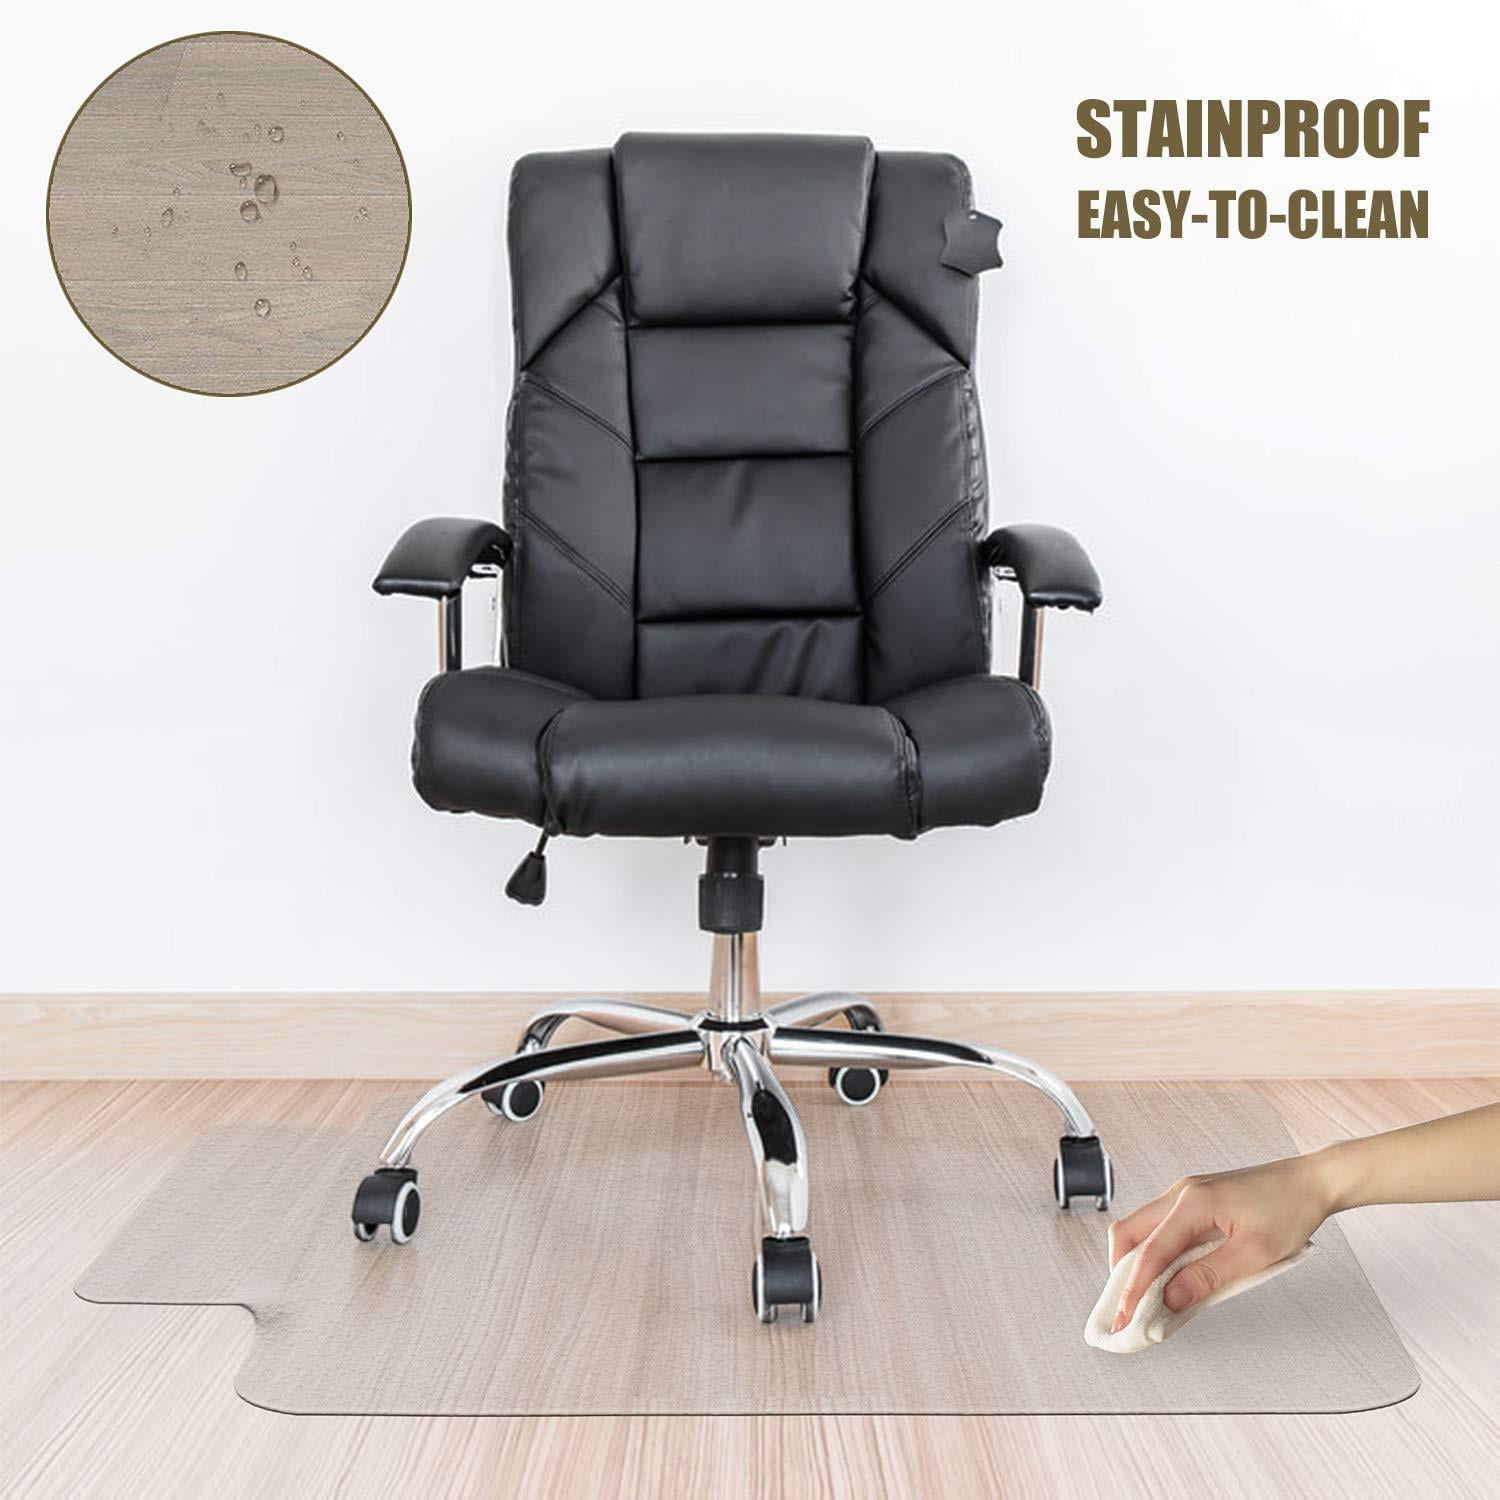 Creatice Computer Chair Mat Walmart for Small Space